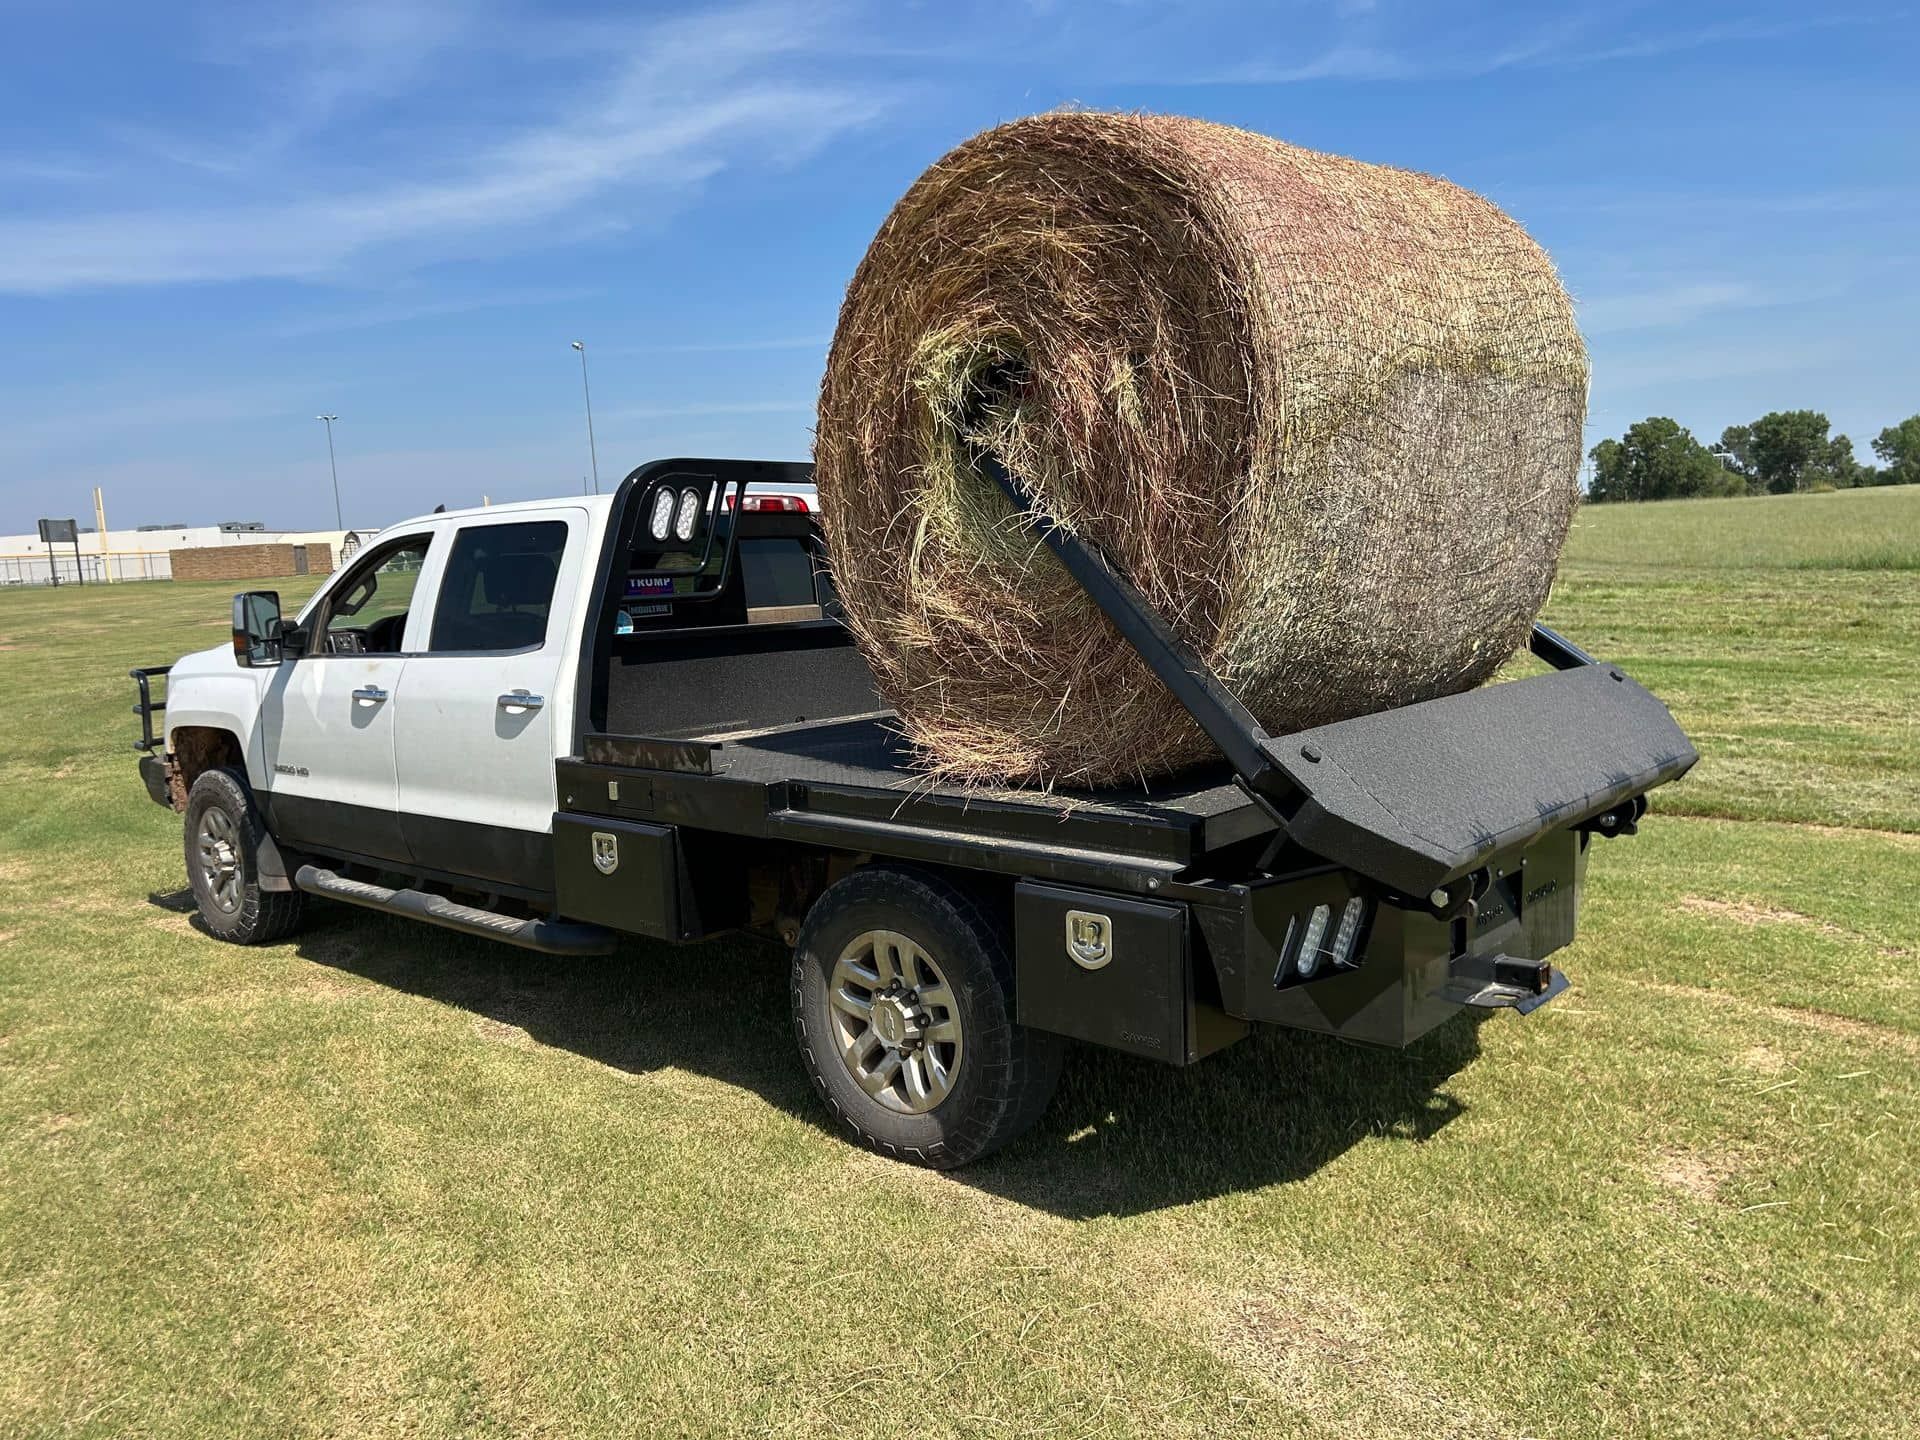 Crownline Arm Bed with hay bale